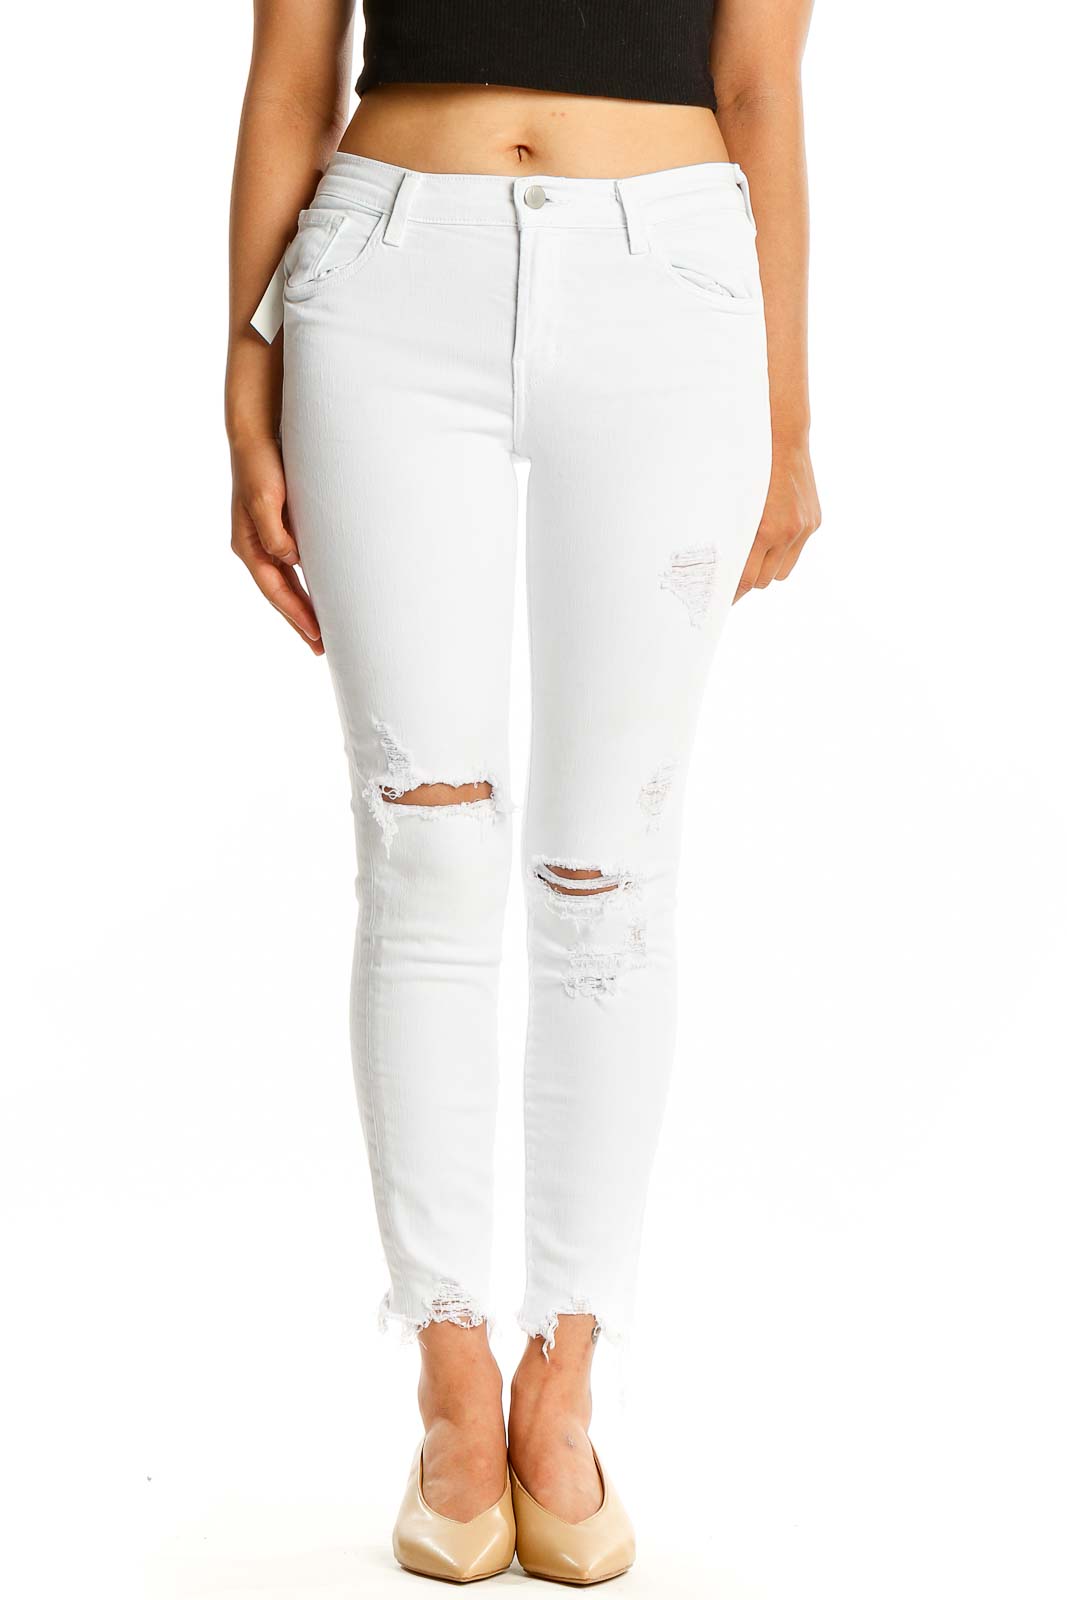 White Skinny Solid Jeans Front